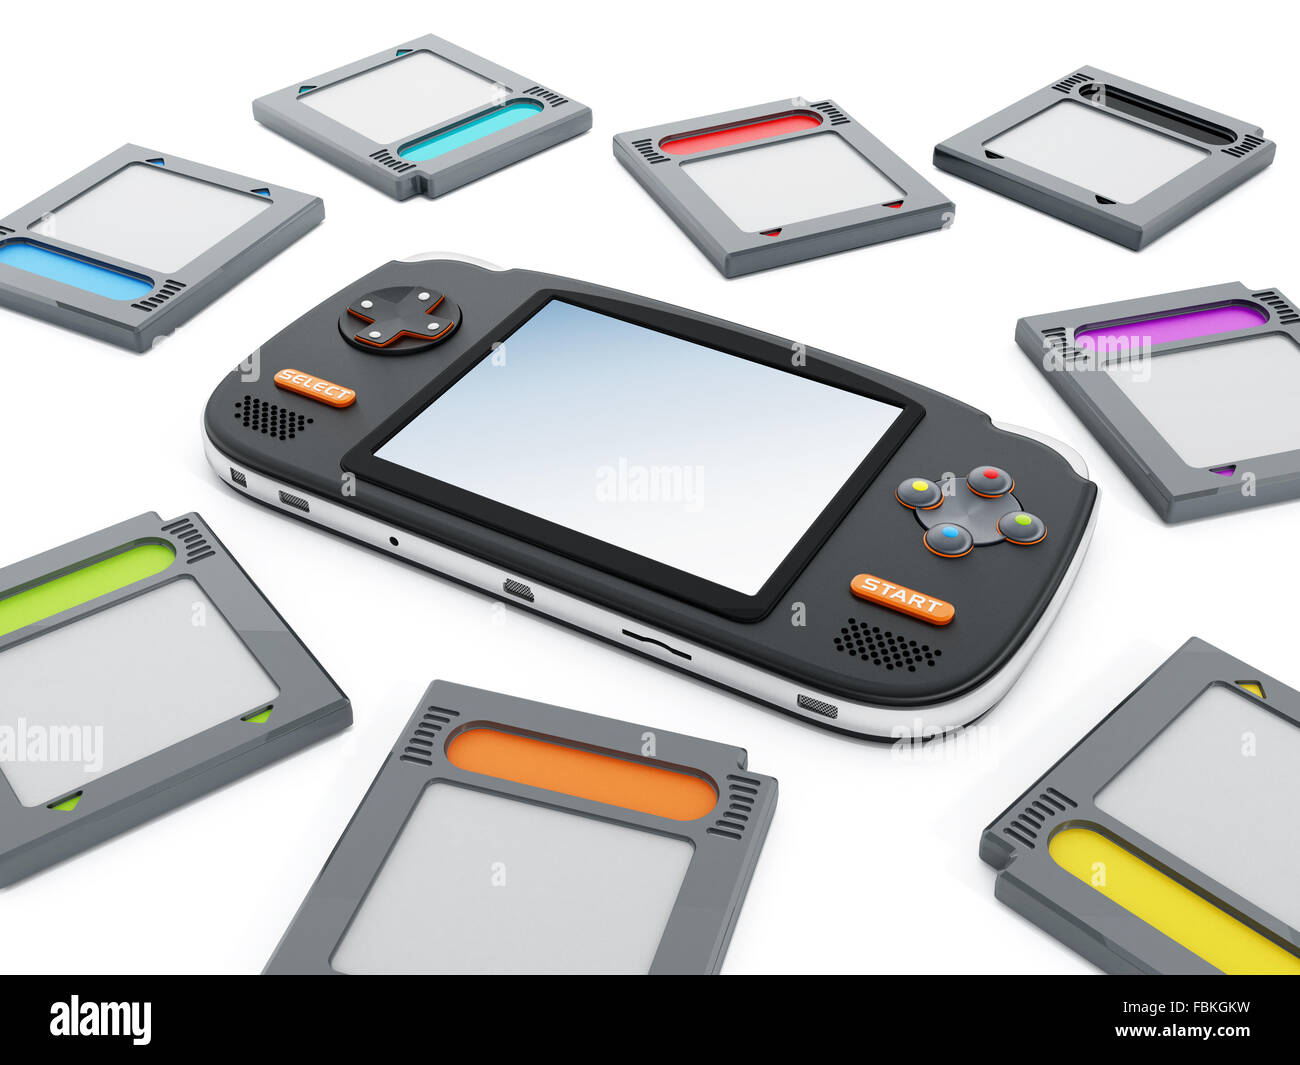 Handheld video game device and retro game cartridges. Stock Photo